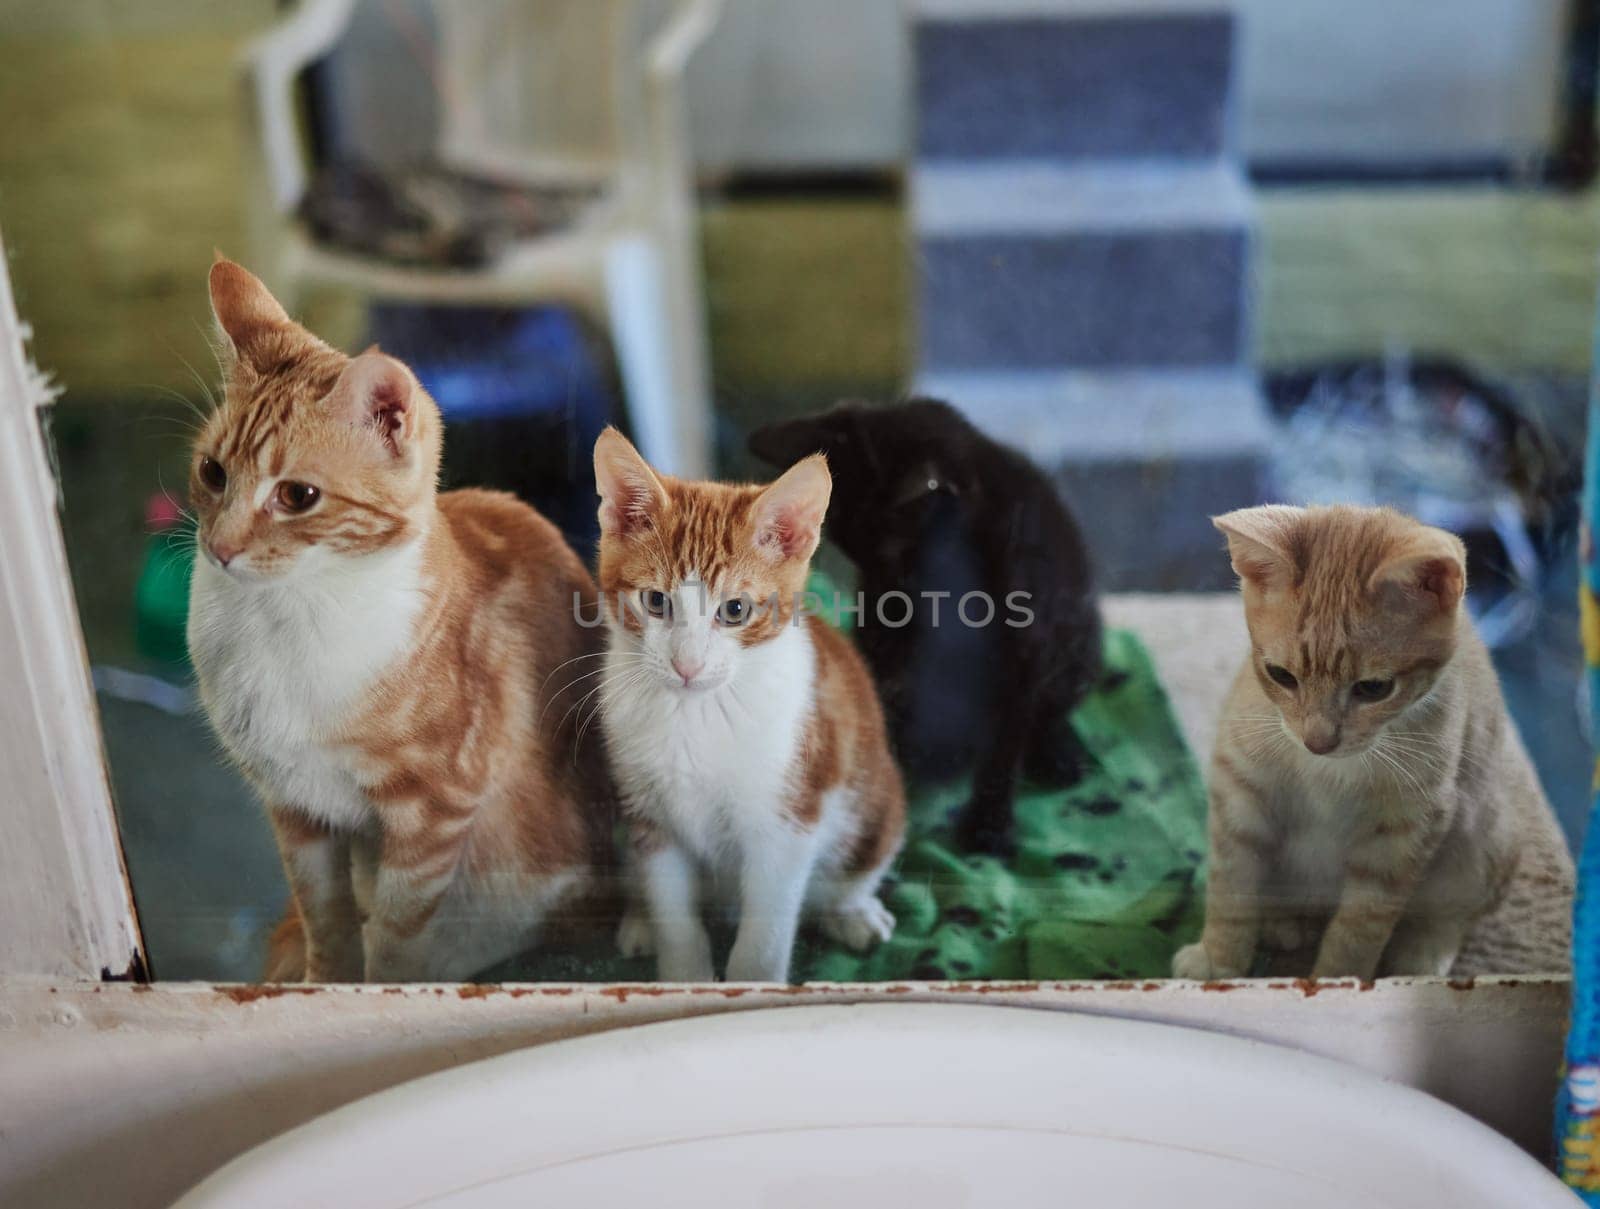 Cats, animal shelter and adoption pets at veterinary clinic, animal welfare and rescue center. Abandoned, homeless and lost group ginger kitten pet store animals waiting for love, hope and pet care by YuriArcurs